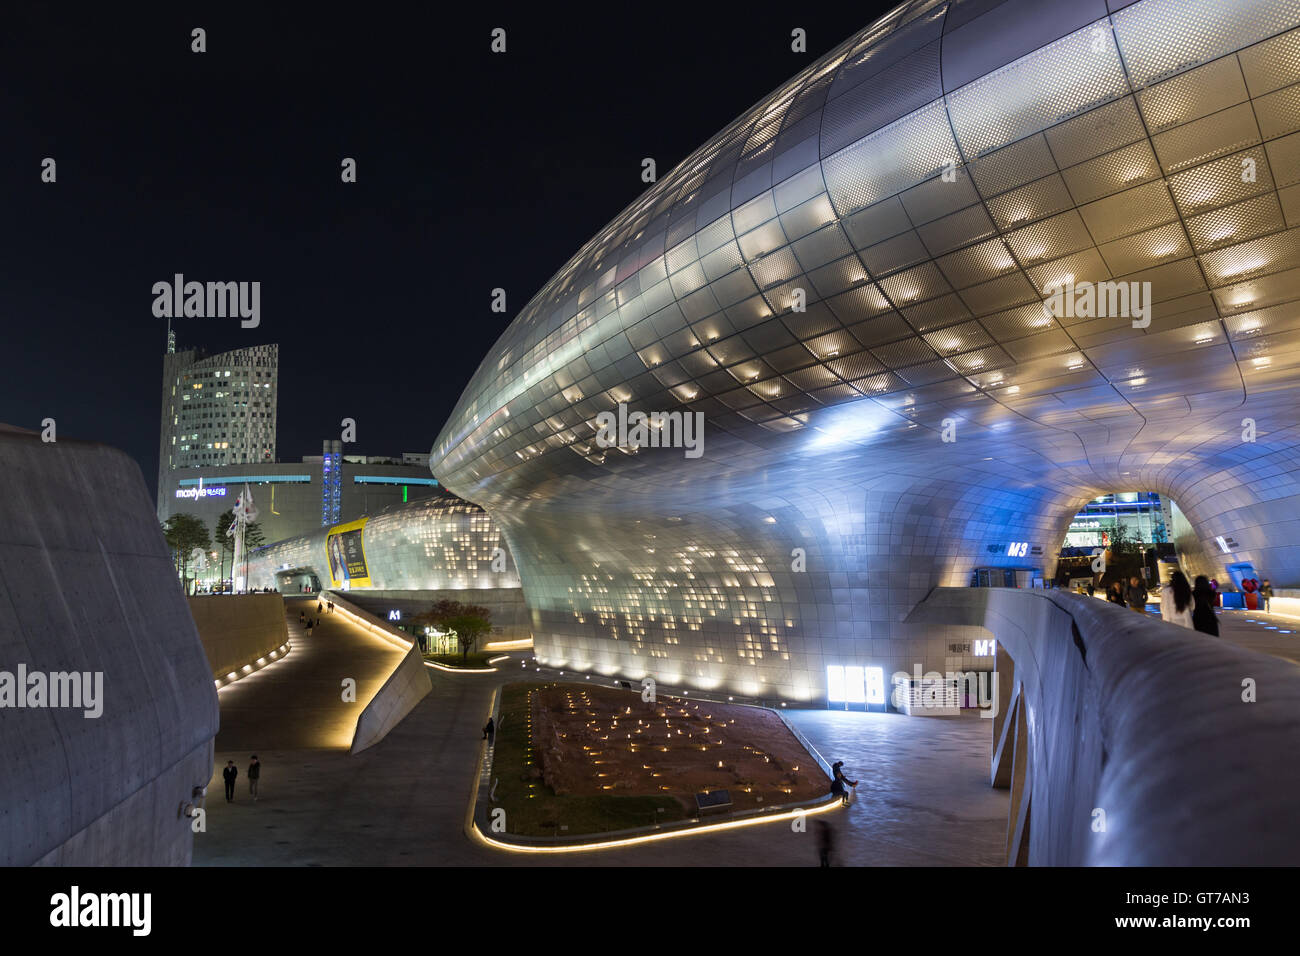 Plaza, bridge and side view of the futuristic Dongdaemun Design Plaza (DDP) in Seoul, South Korea at night. Stock Photo